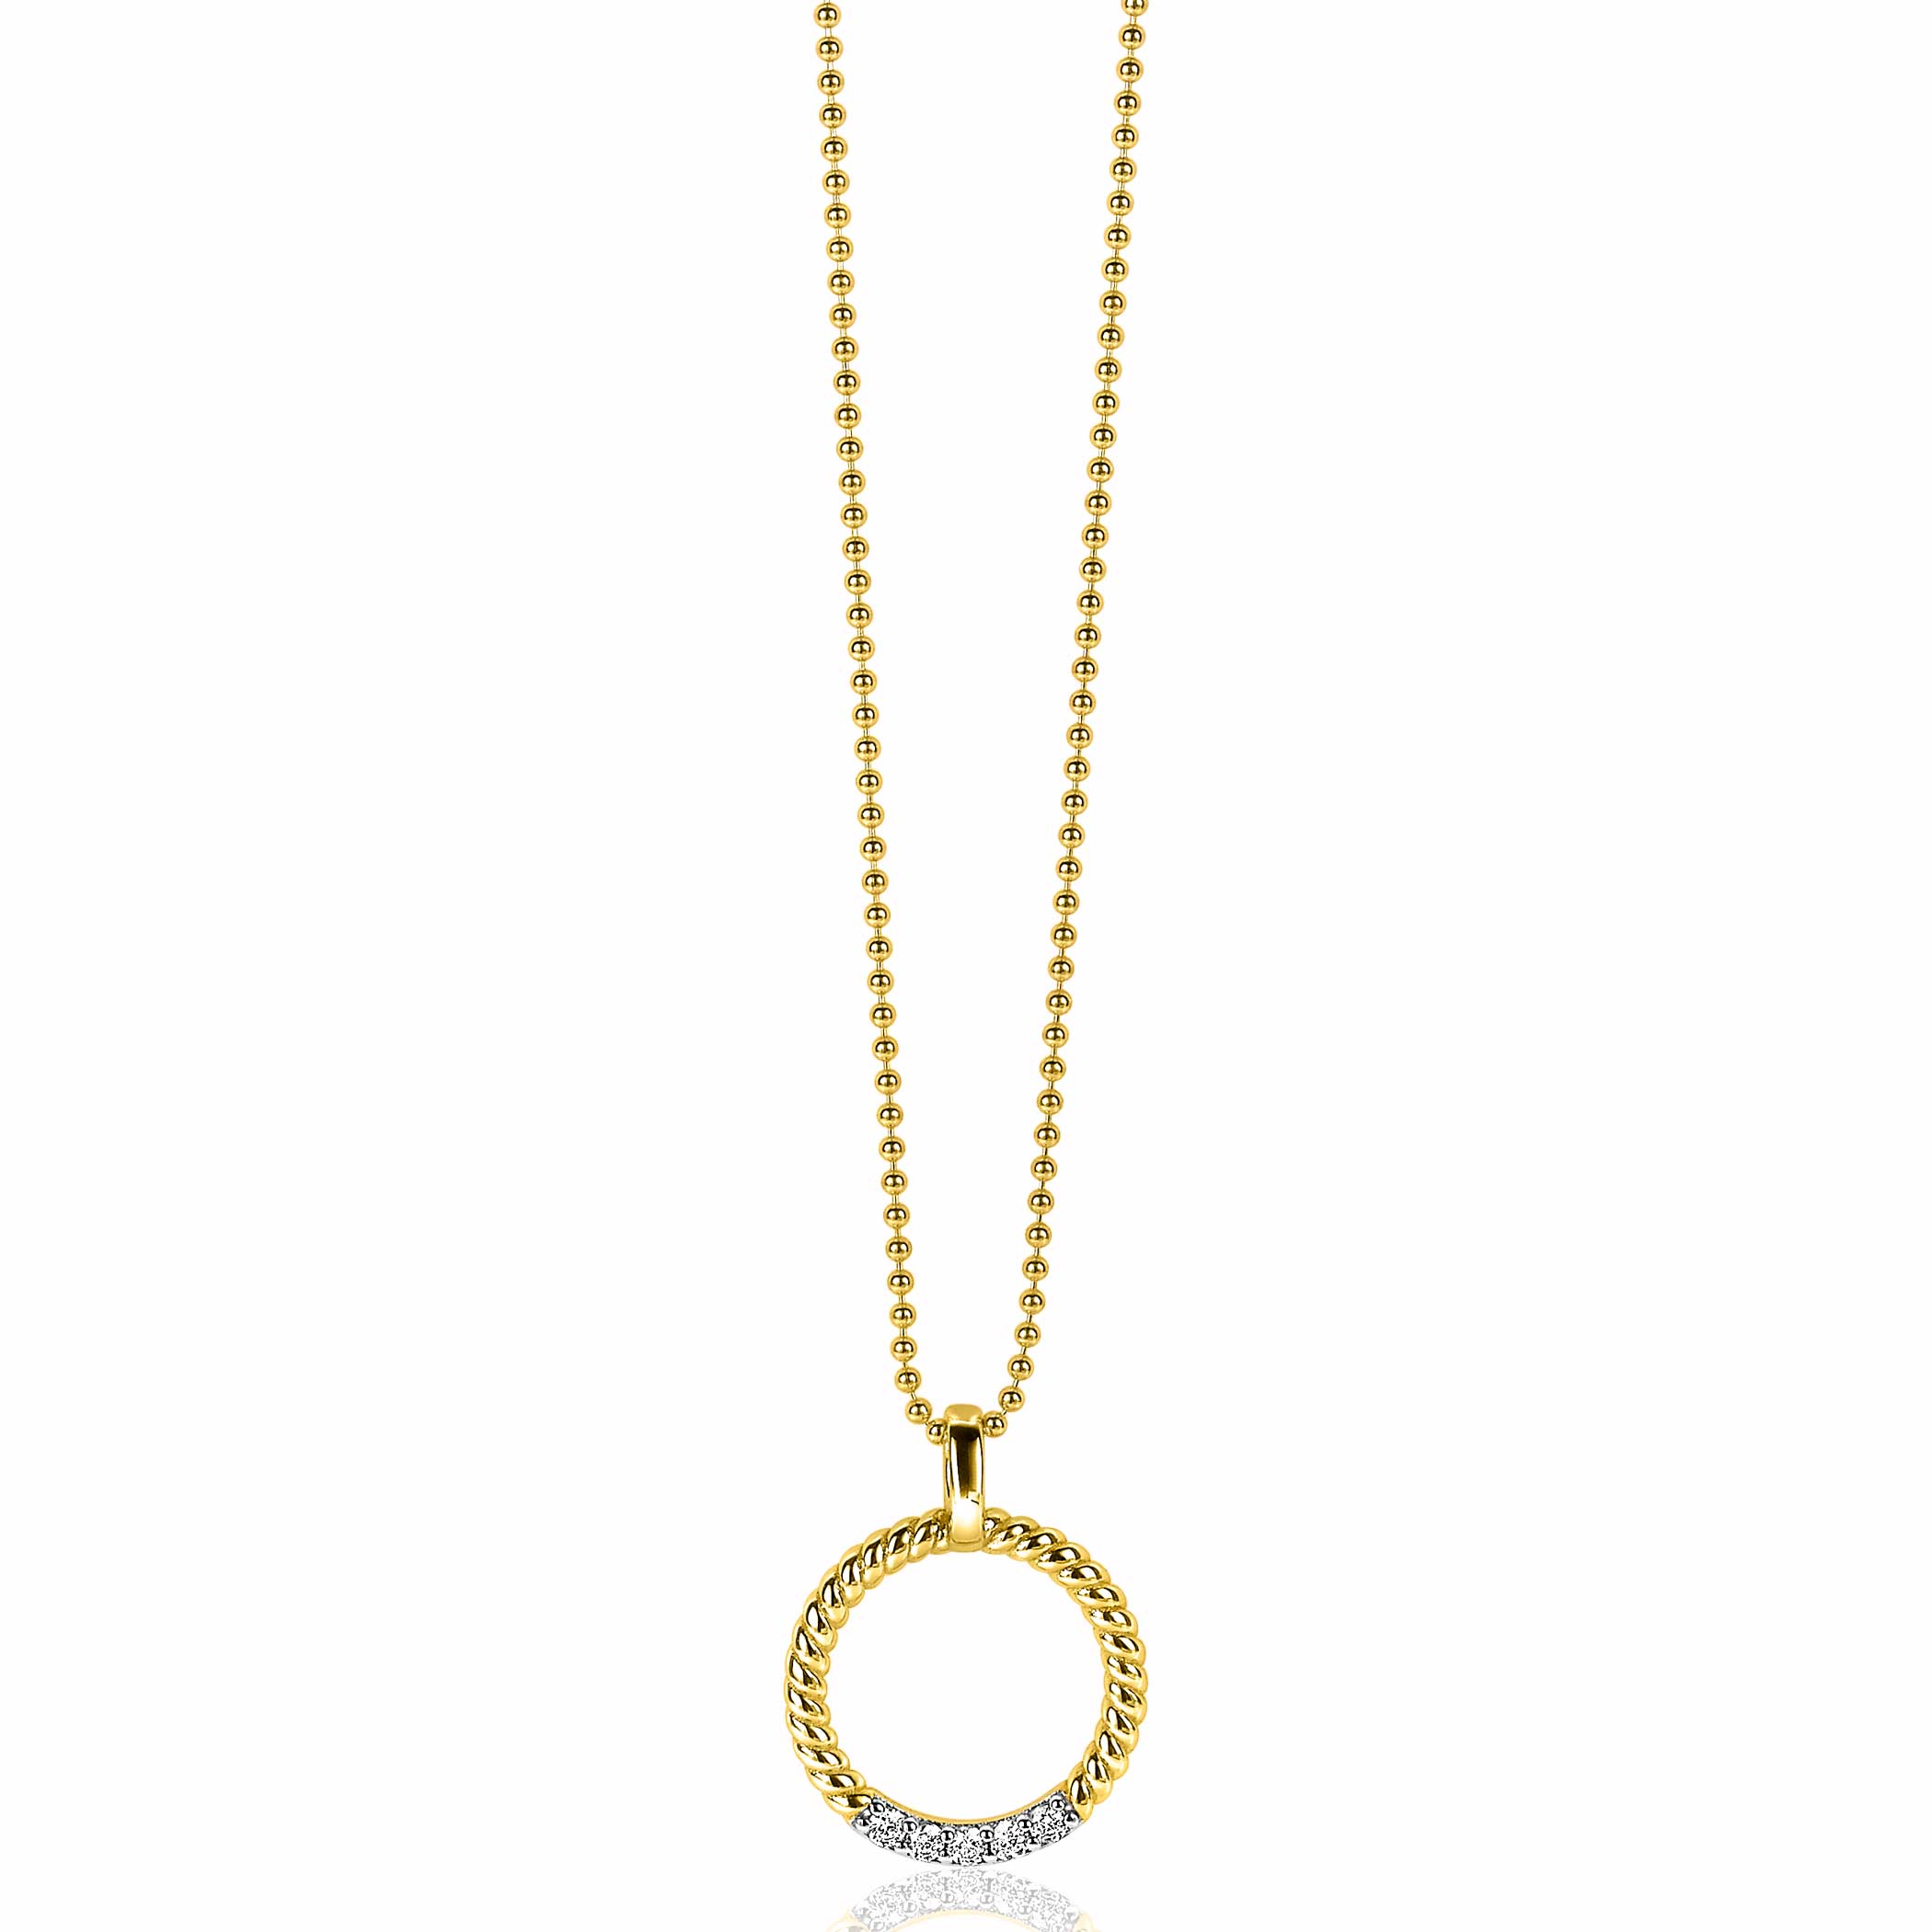 22mm ZINZI Gold Plated Sterling Silver Round Pendant Twist Design White Zirconia ZIH2128Y (excl. necklace)